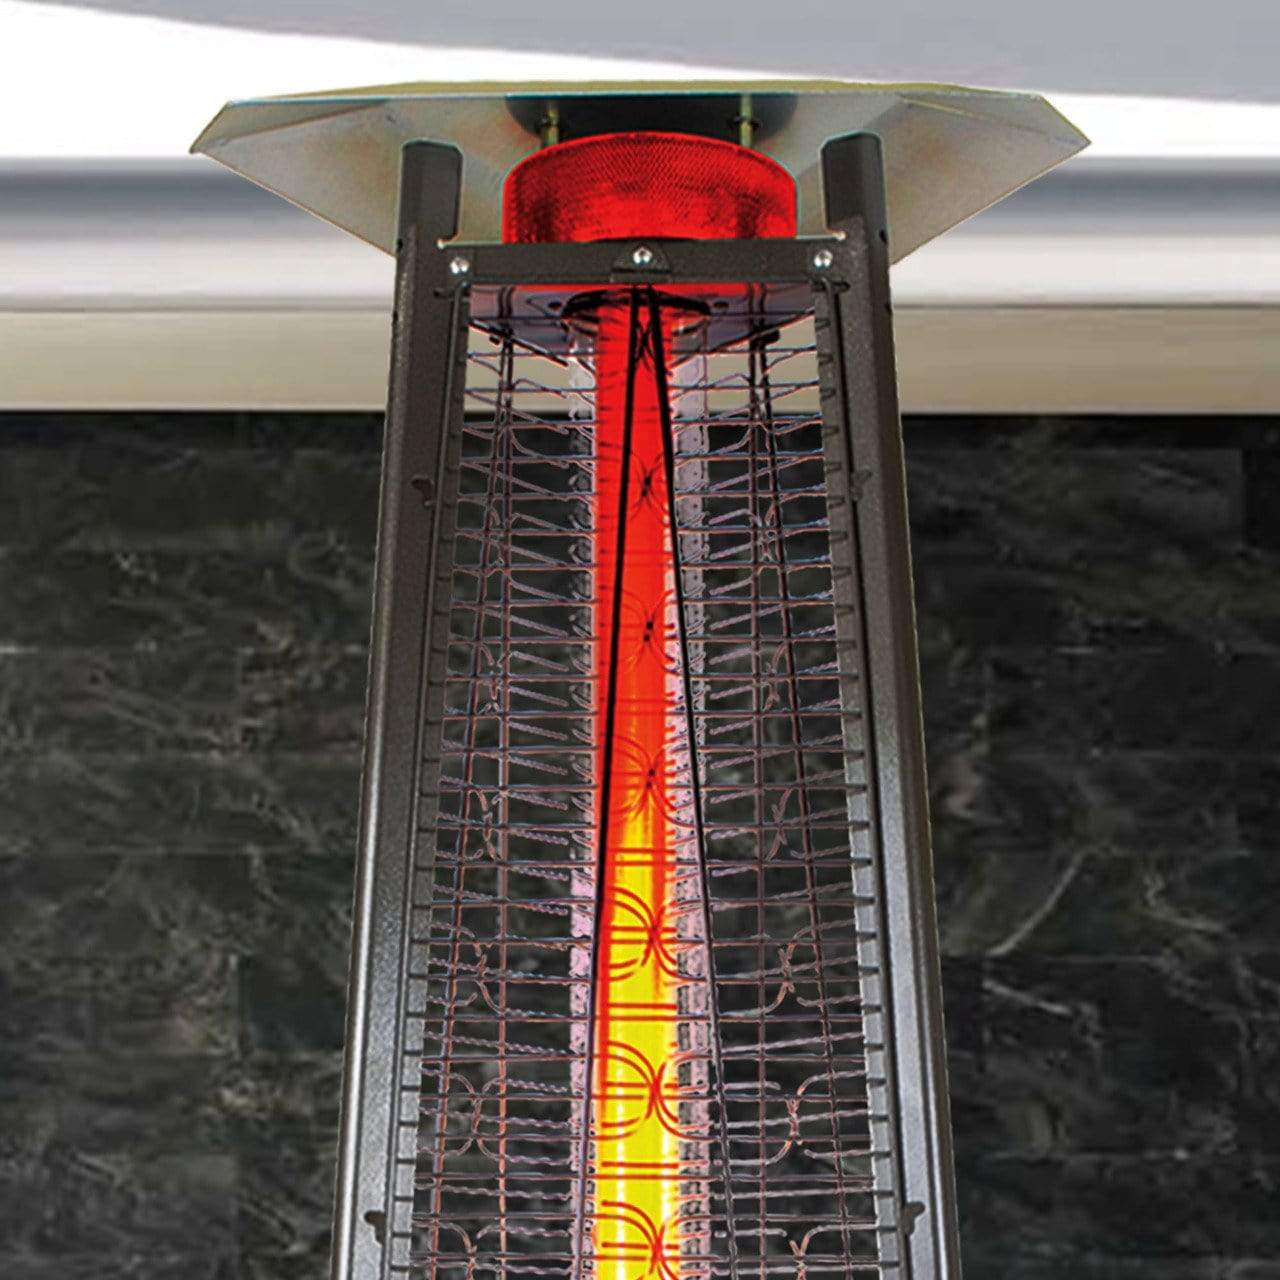 Lava Heat Italia Tower Patio Heater The 2G Triangle Flame Tower Heater, 92.5", 66,000 BTU, Remote Control, Push Button Ignition, Stainless Steel, Bronze, Black, Liquid Propane or Natural Gas - ASSEMBLED